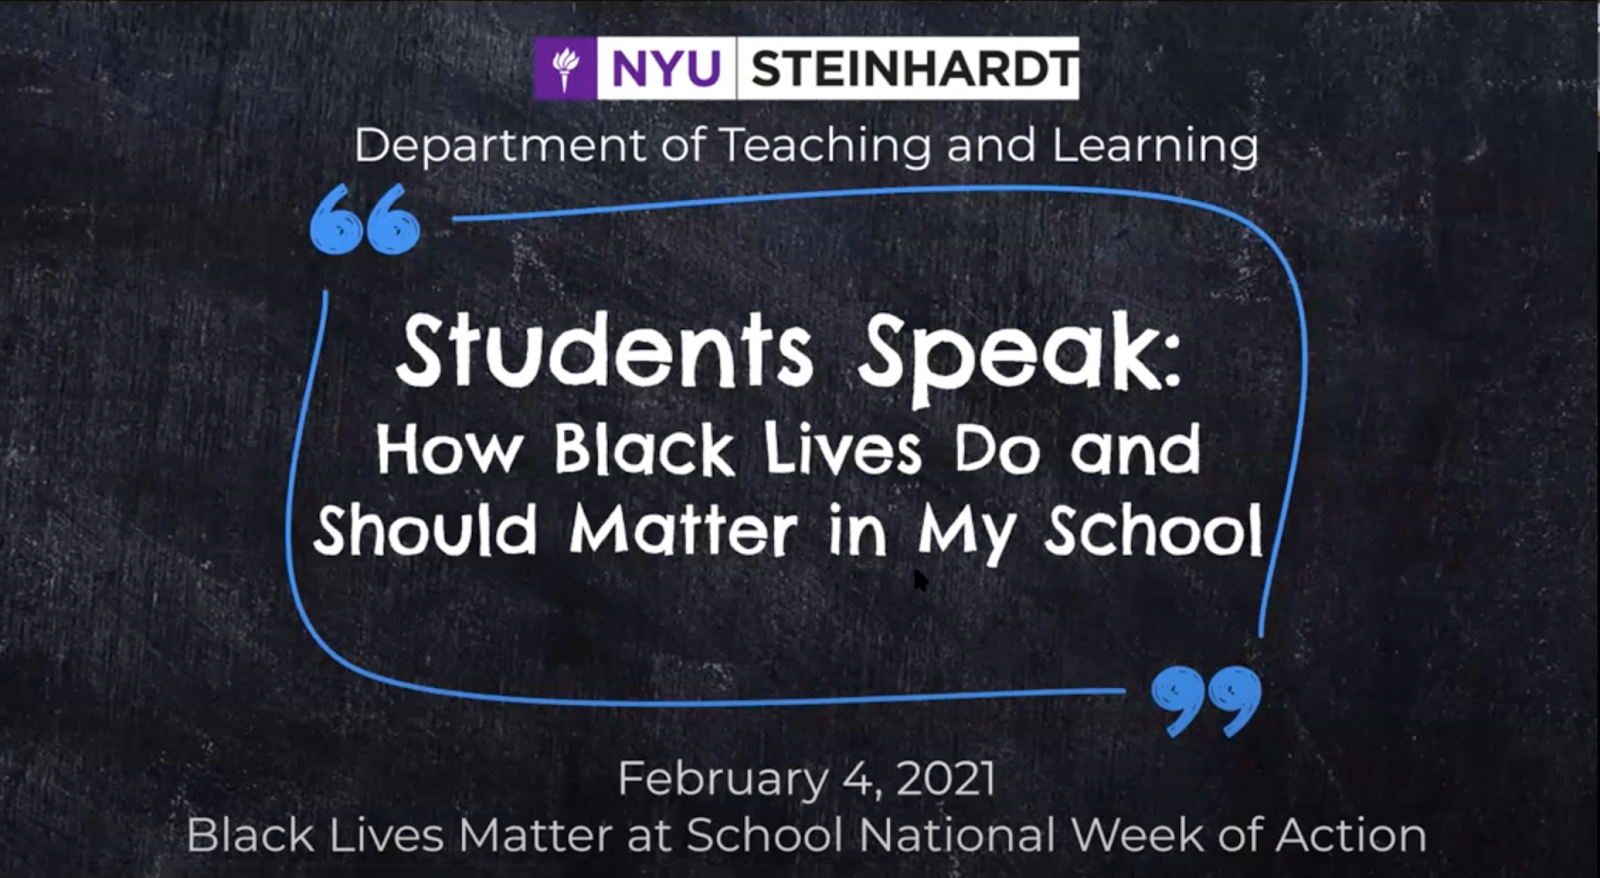 Students Speak: How Black Lives Do and Should Matter in My School virtual panel from NYU Steinhardt on February 4, 2021.